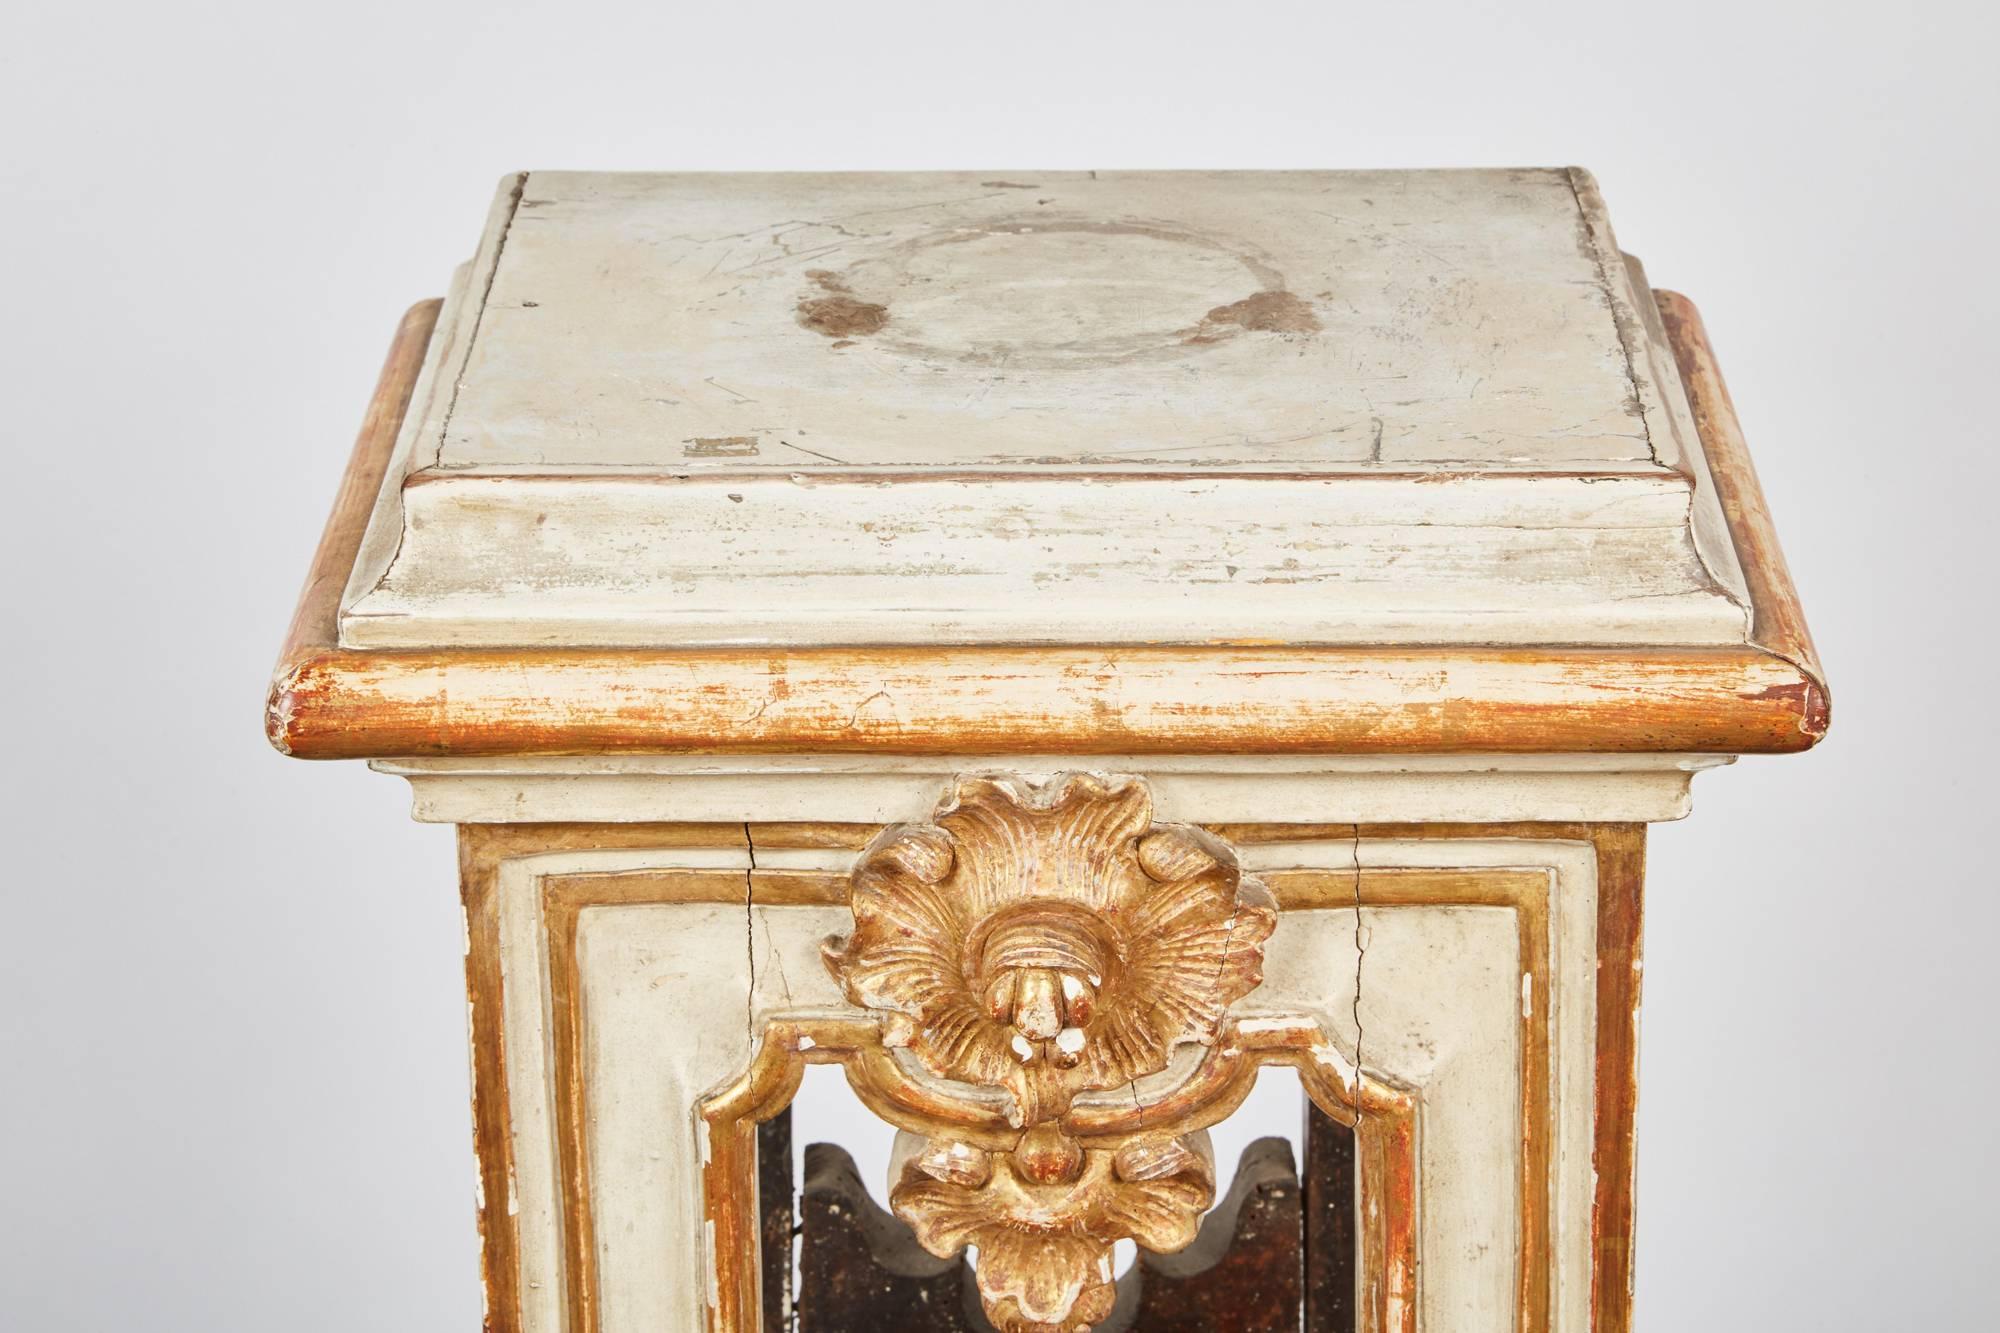 Pair of 18th Century Italian Rococo Cream Painted and Parcel Gilt-Pedestal For Sale 2